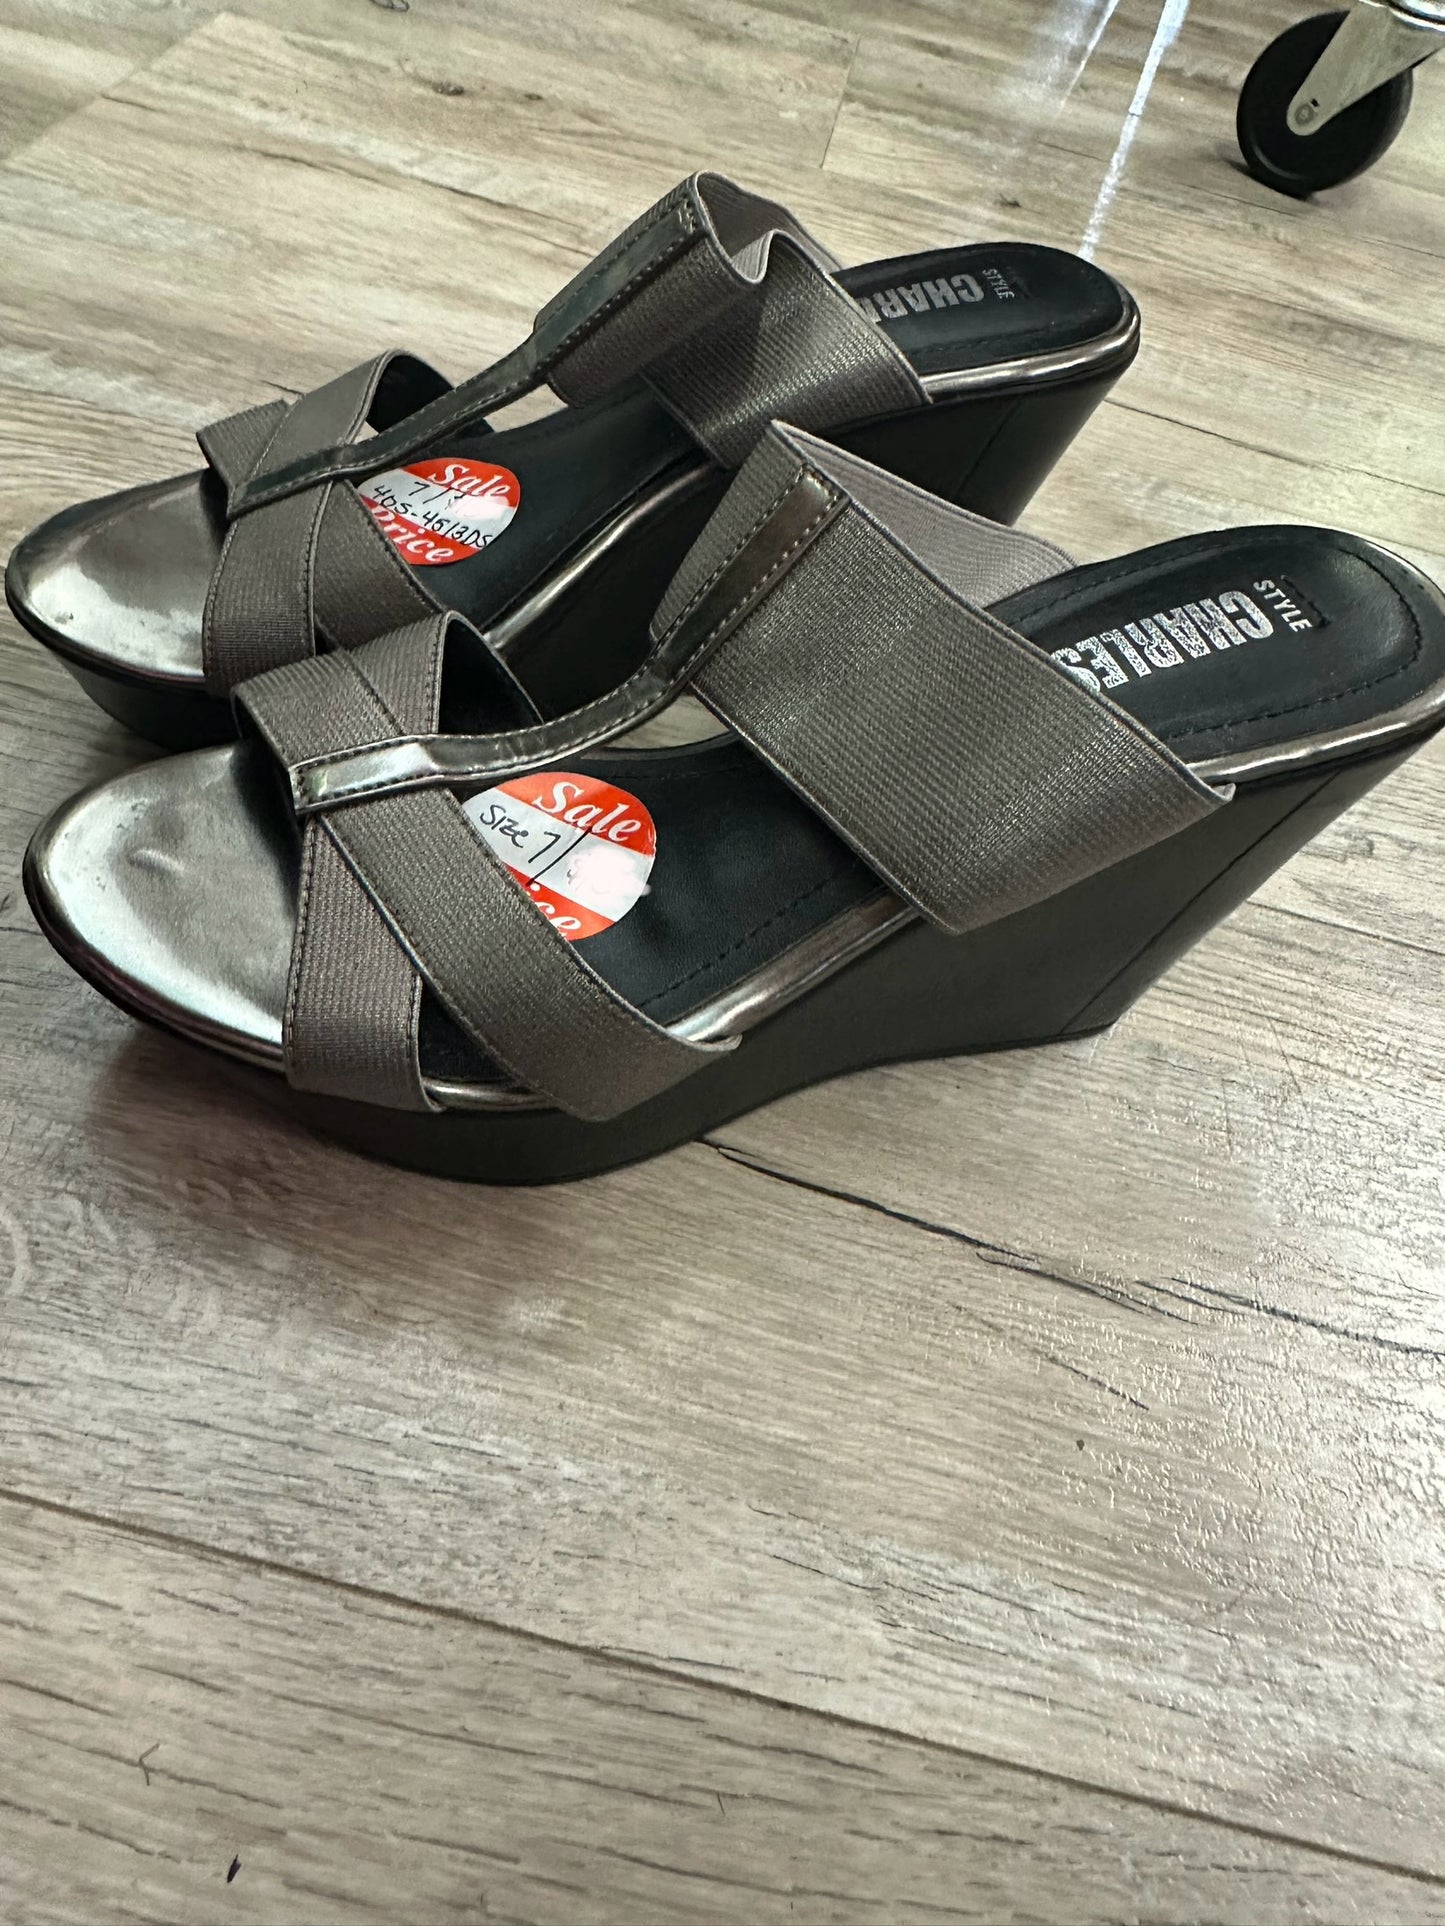 CHARLES DAVID US Size 7 Gray Pewter Strappy Plaform Wedge Heel Sandals Shoes